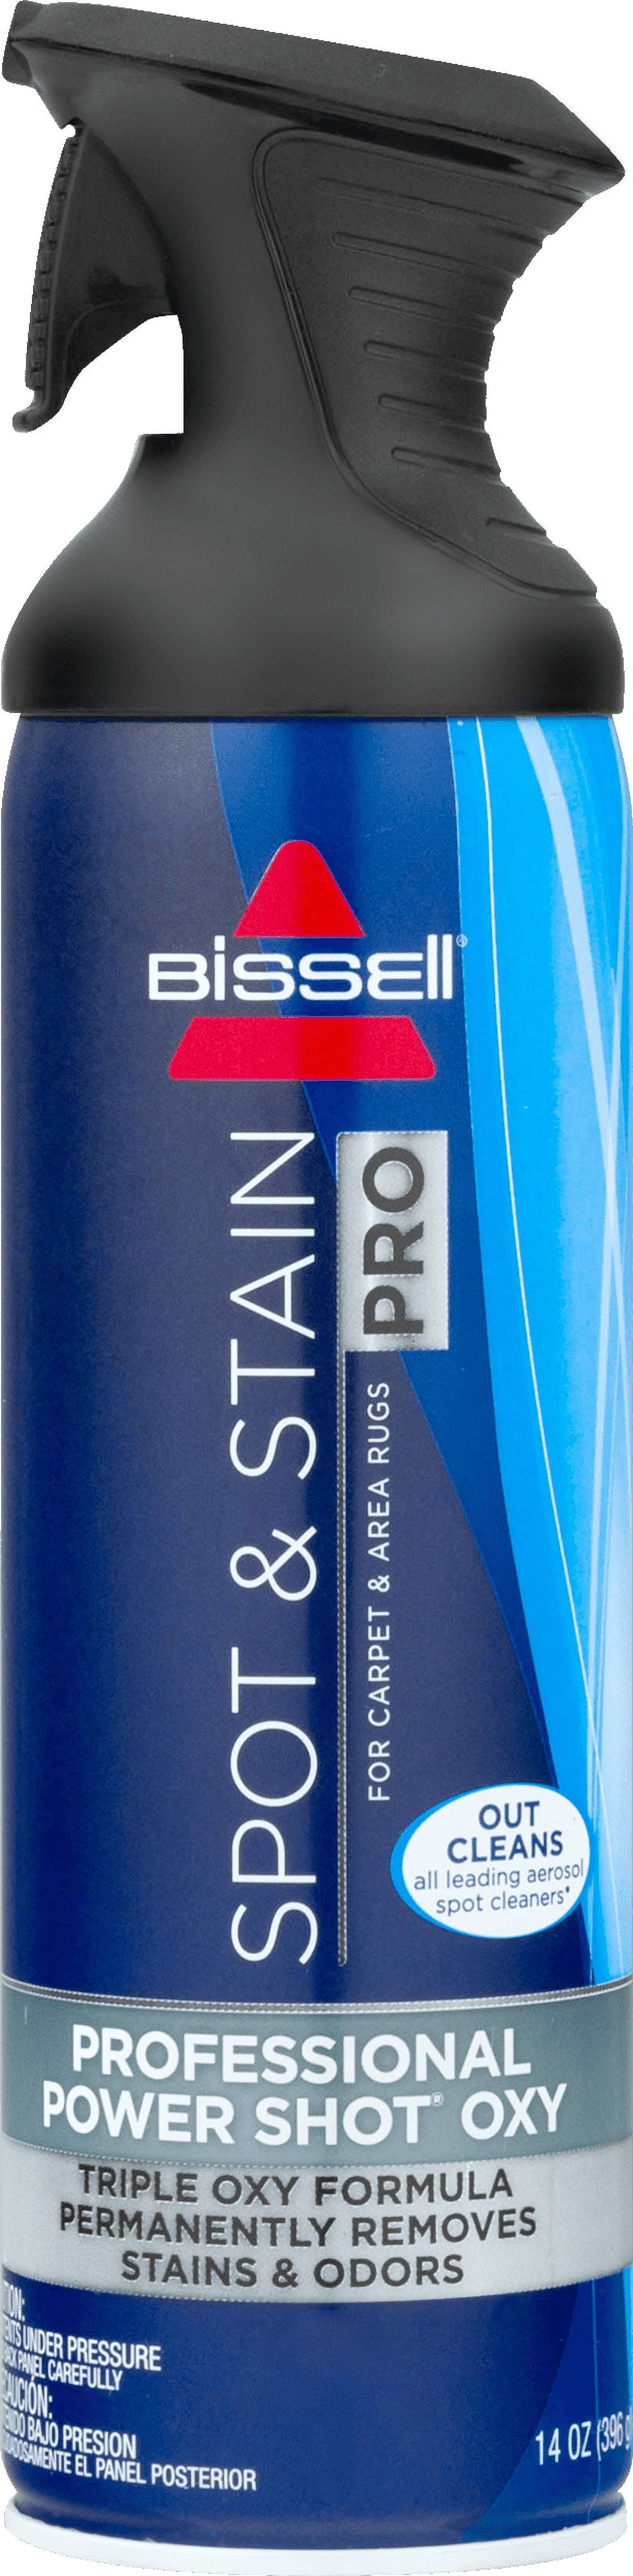 NEW 6-PACK Bissell 13A2 Oxy Pro 14 oz Stain Remover & Carpet Spot Cleaner  Spray